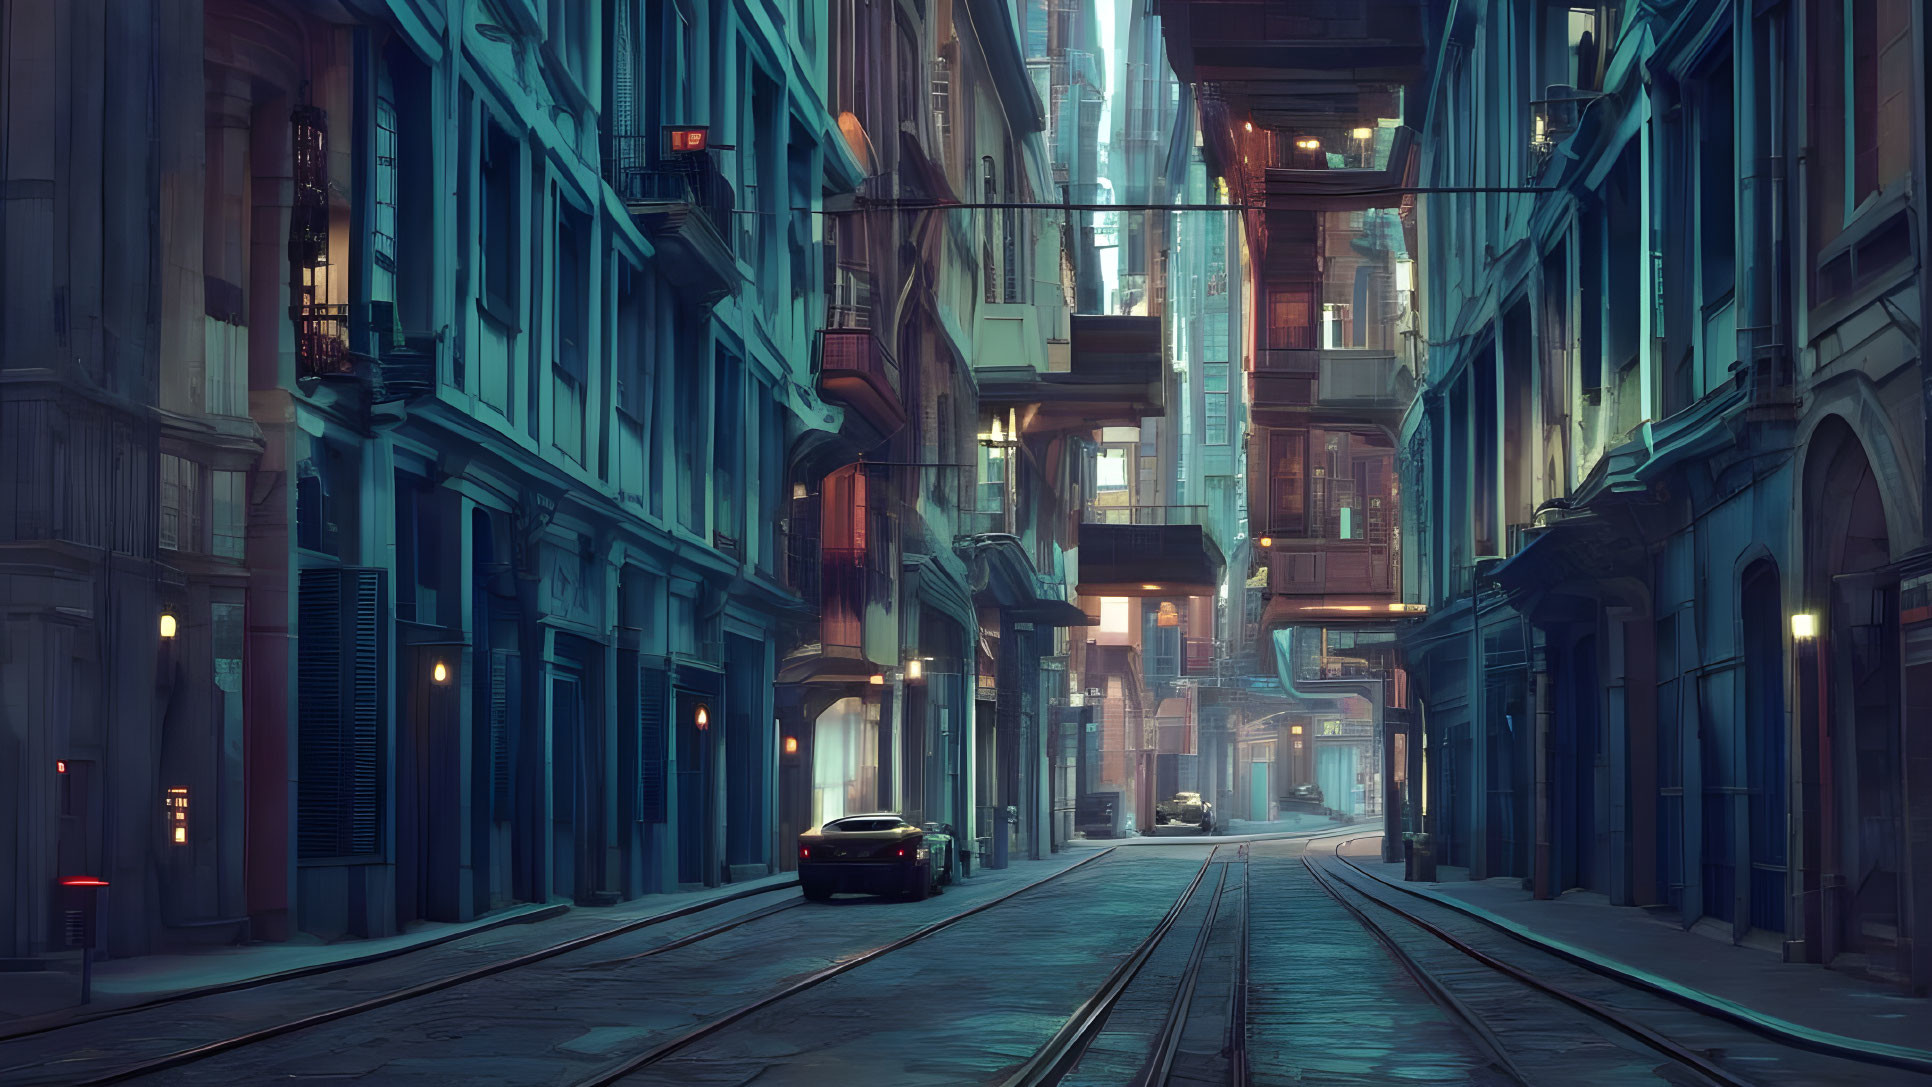 Futuristic city alley at twilight with neon signs, lone car, towering buildings - cyberpunk ambiance